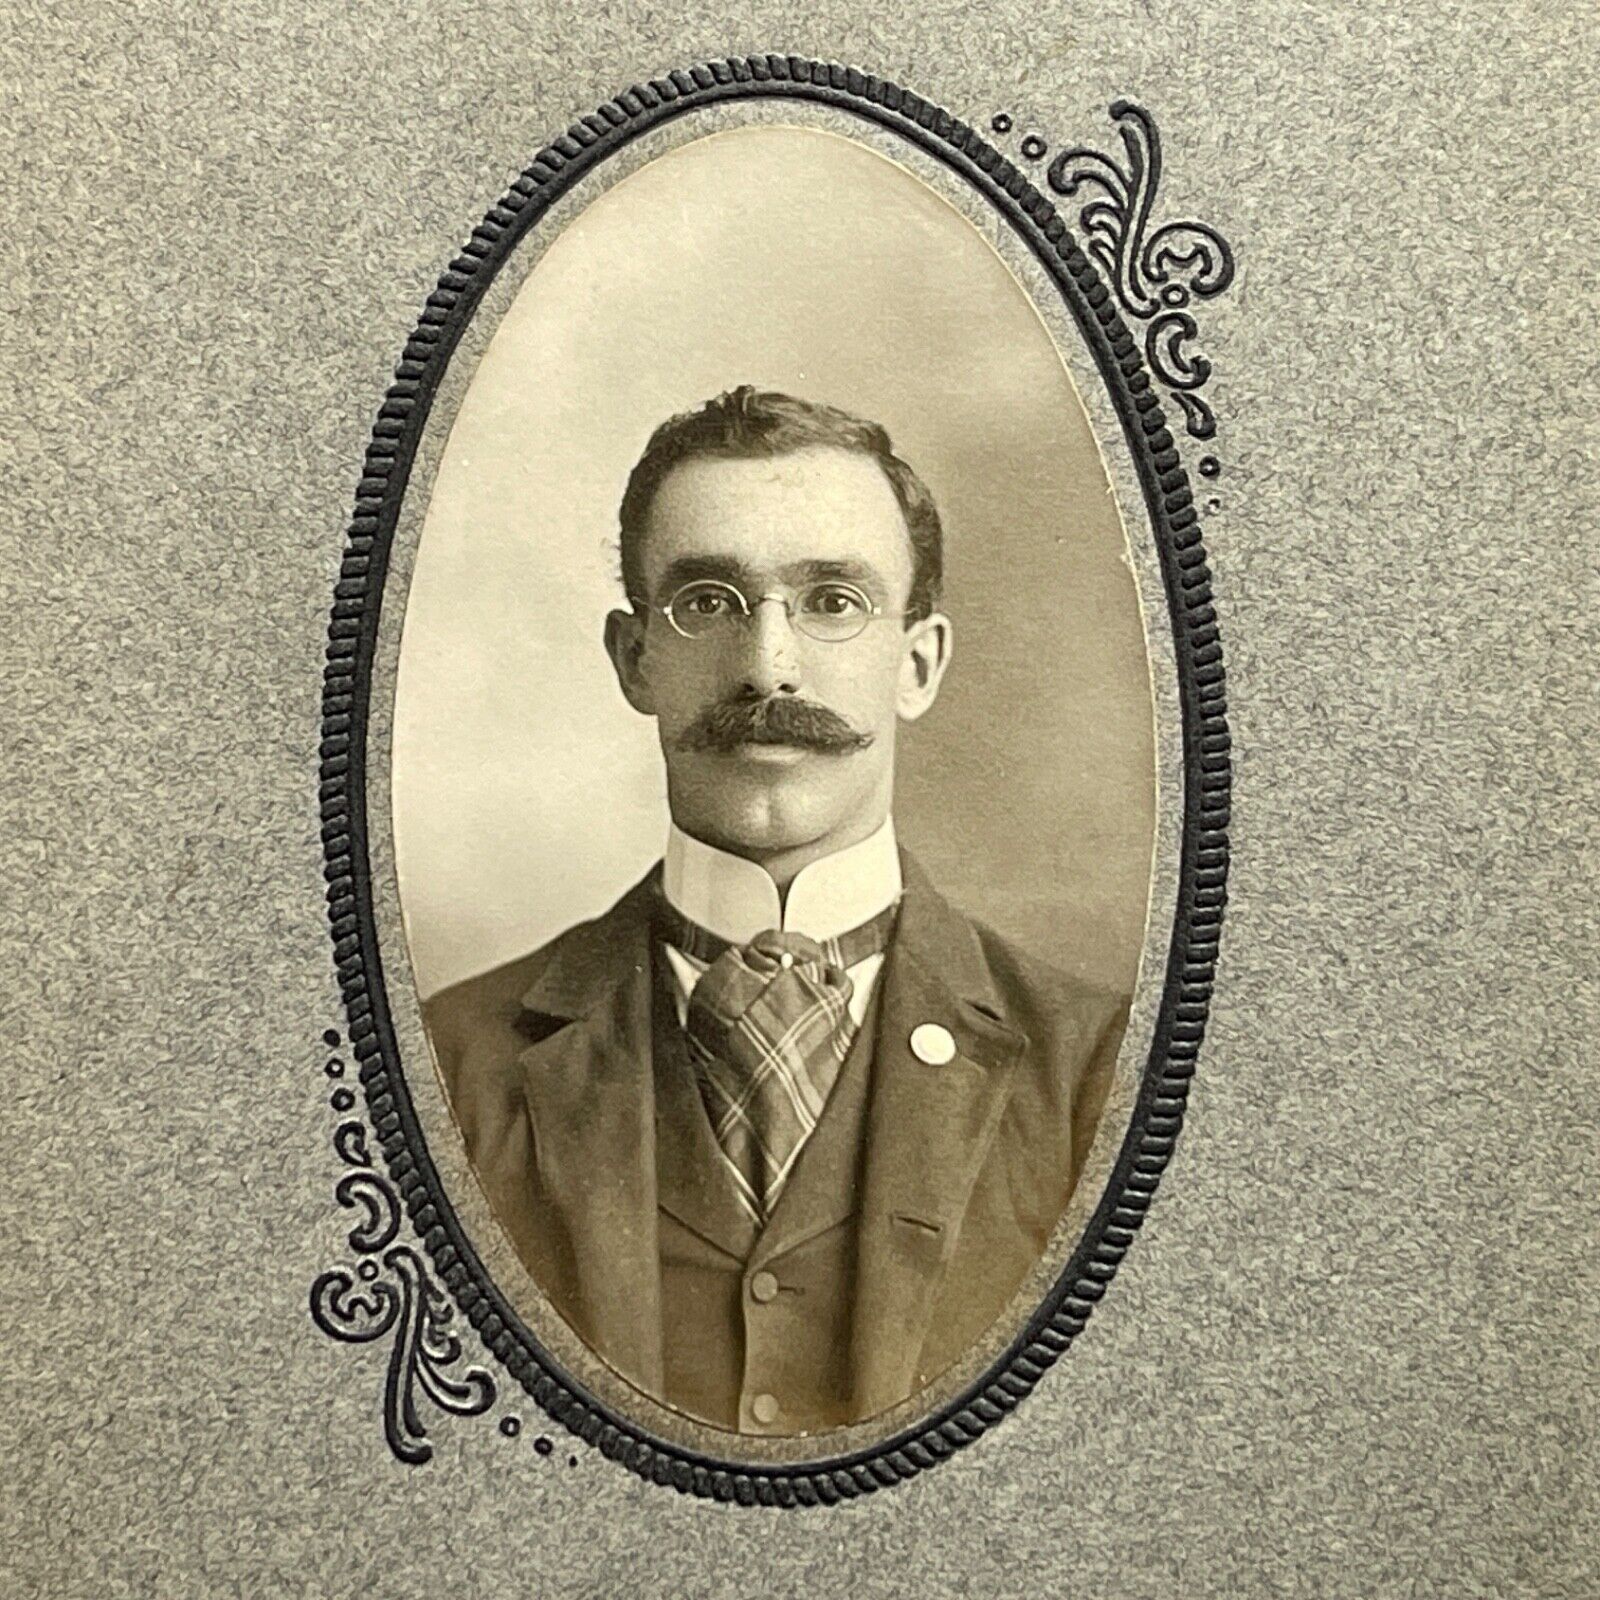 Antique Photo Board Mounted Portrait of Man with Mustache Wearing Glasses